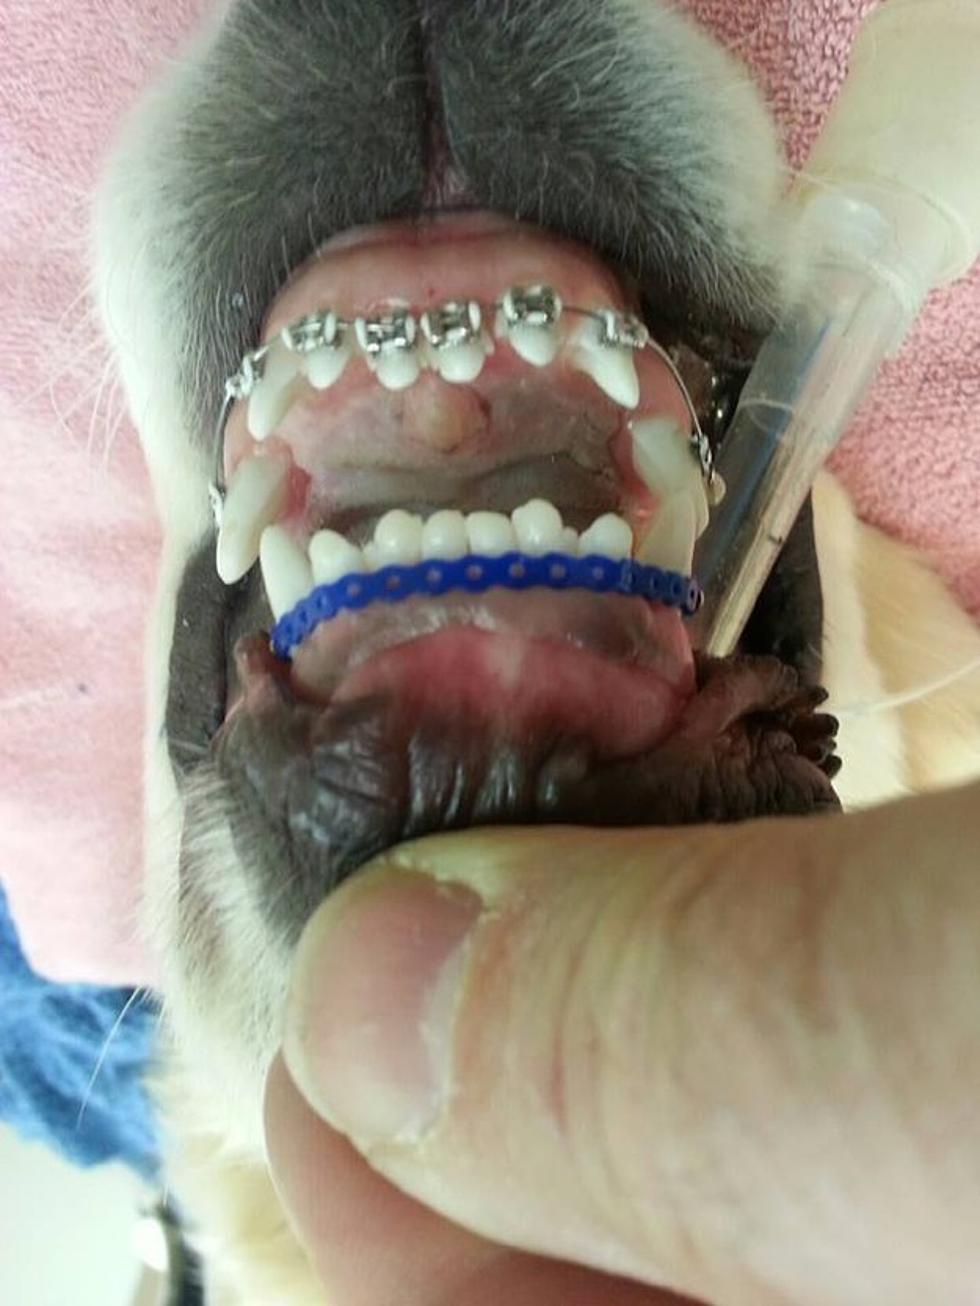 I Love My Dog and All, but Come on – Braces?